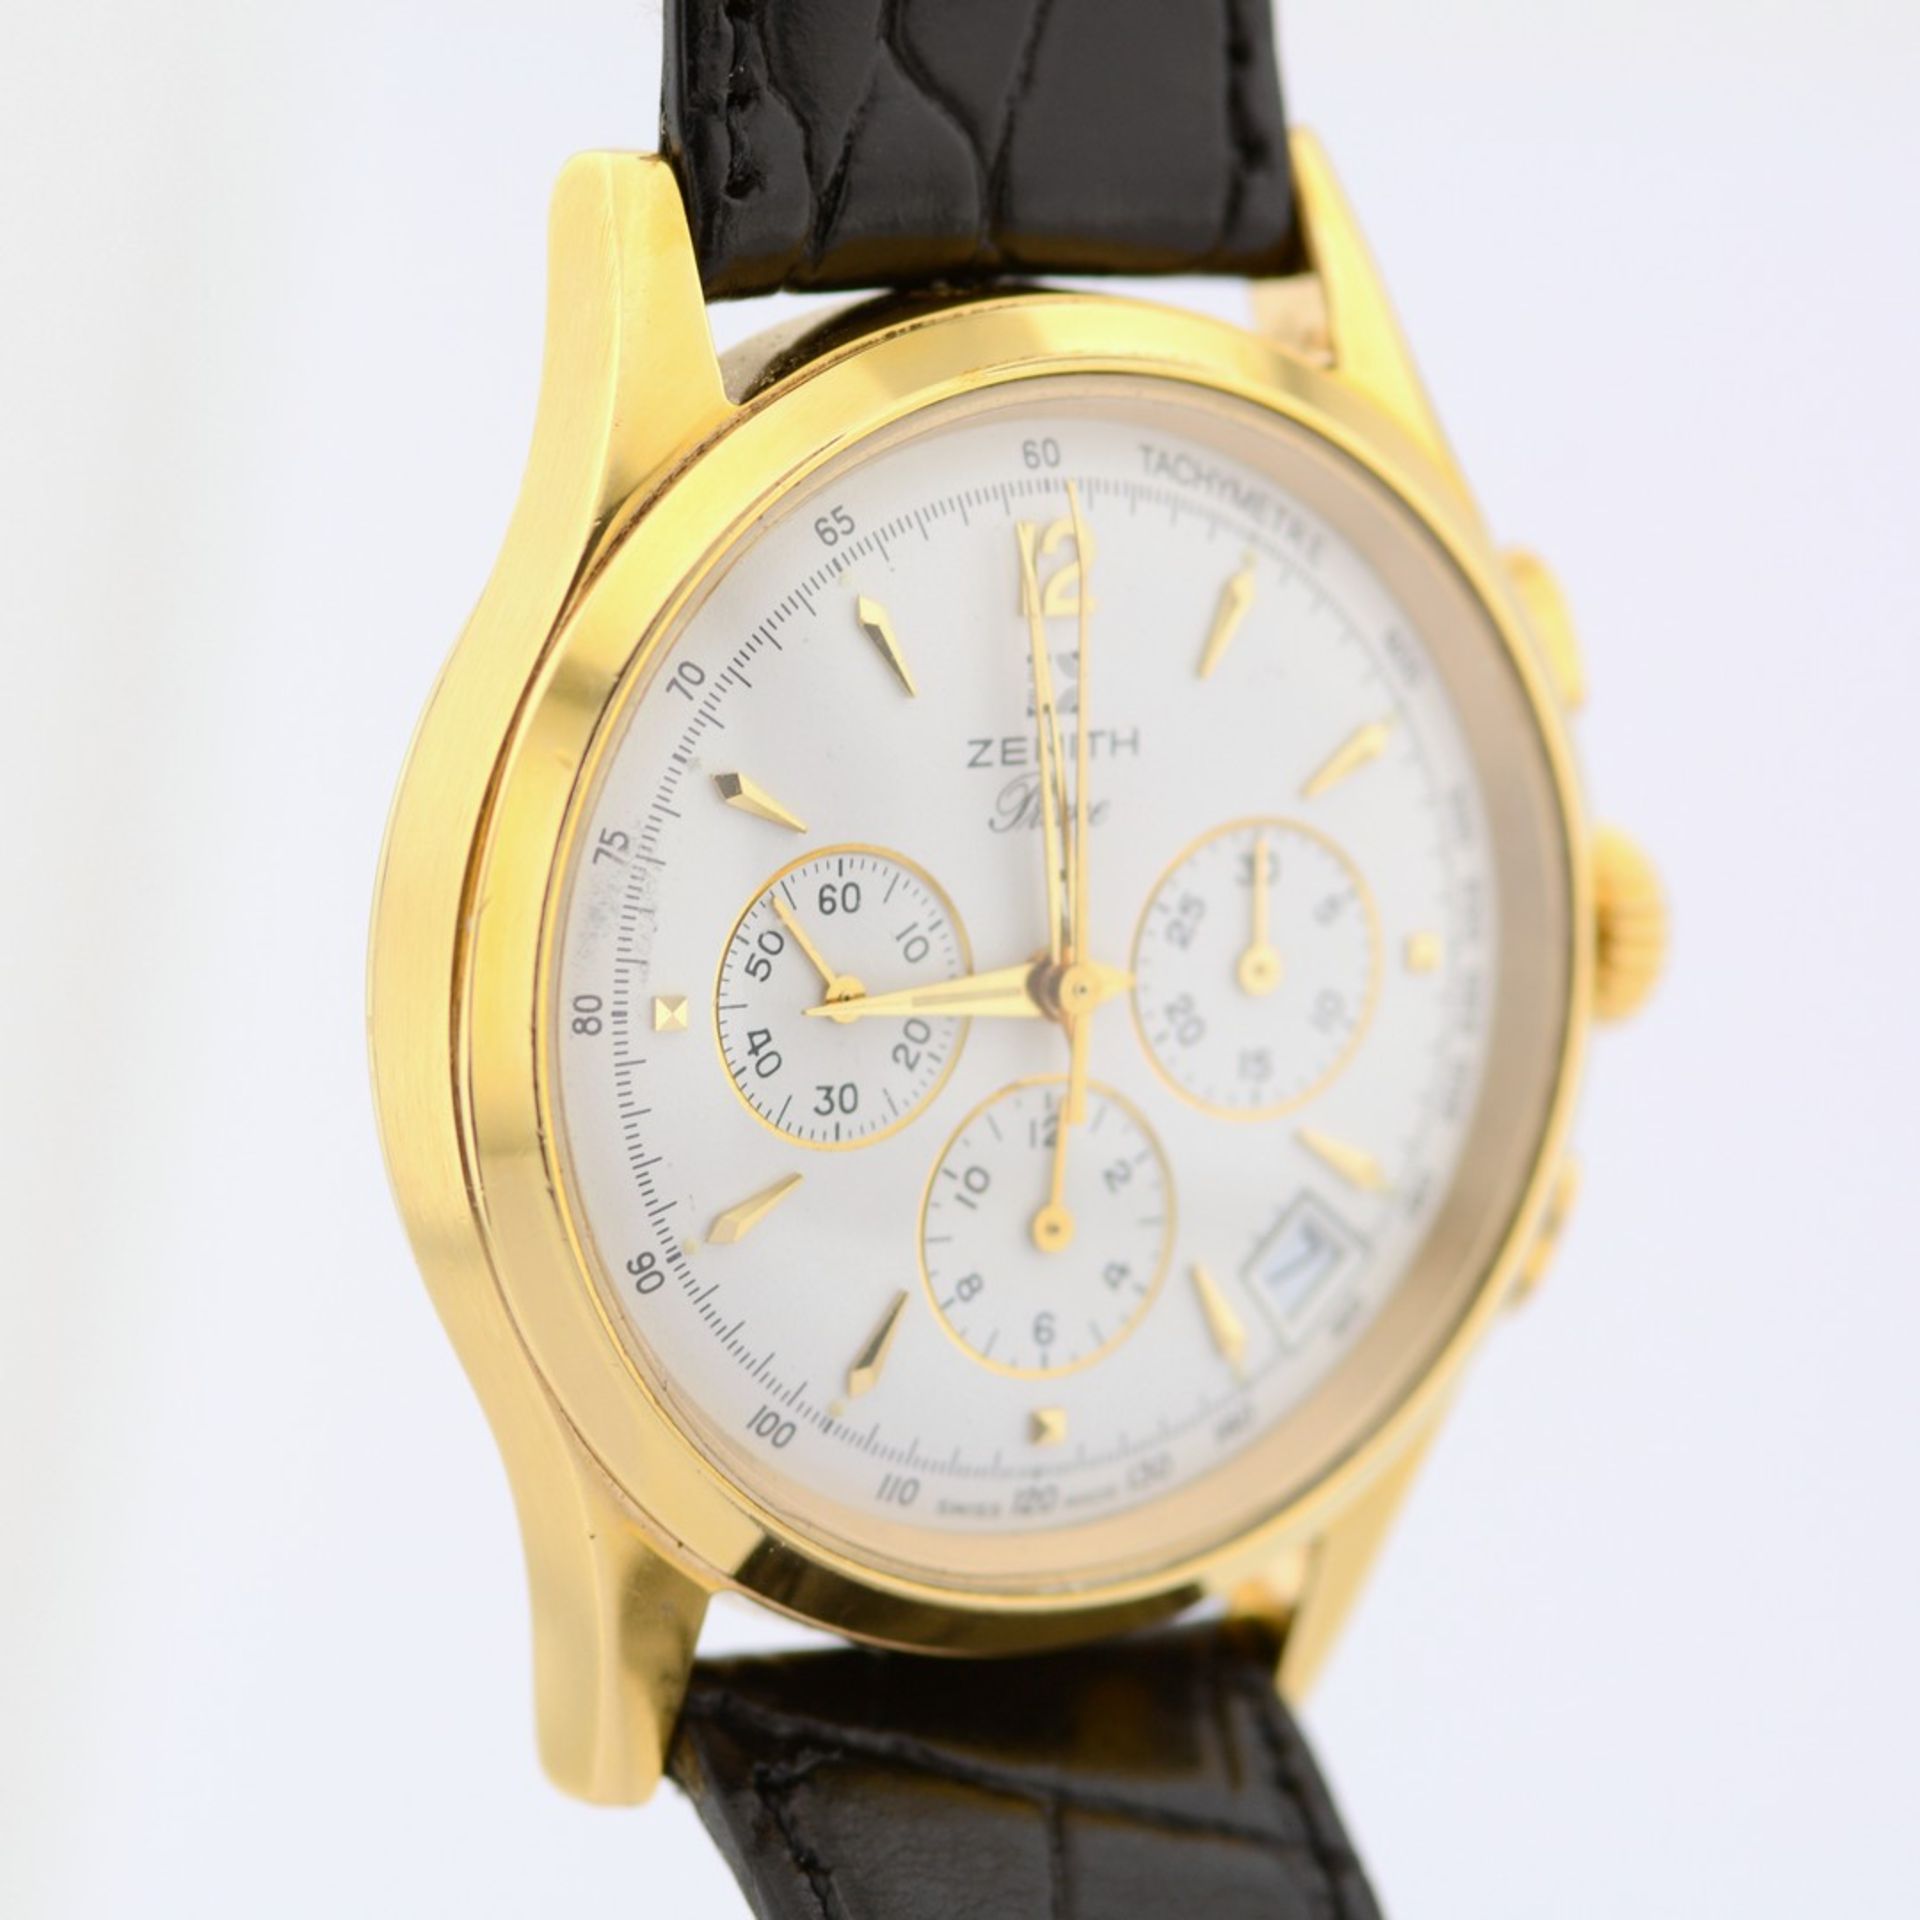 Zenith / Prime Chronograph - Gentlemen's Gold-plated Wristwatch - Image 6 of 8